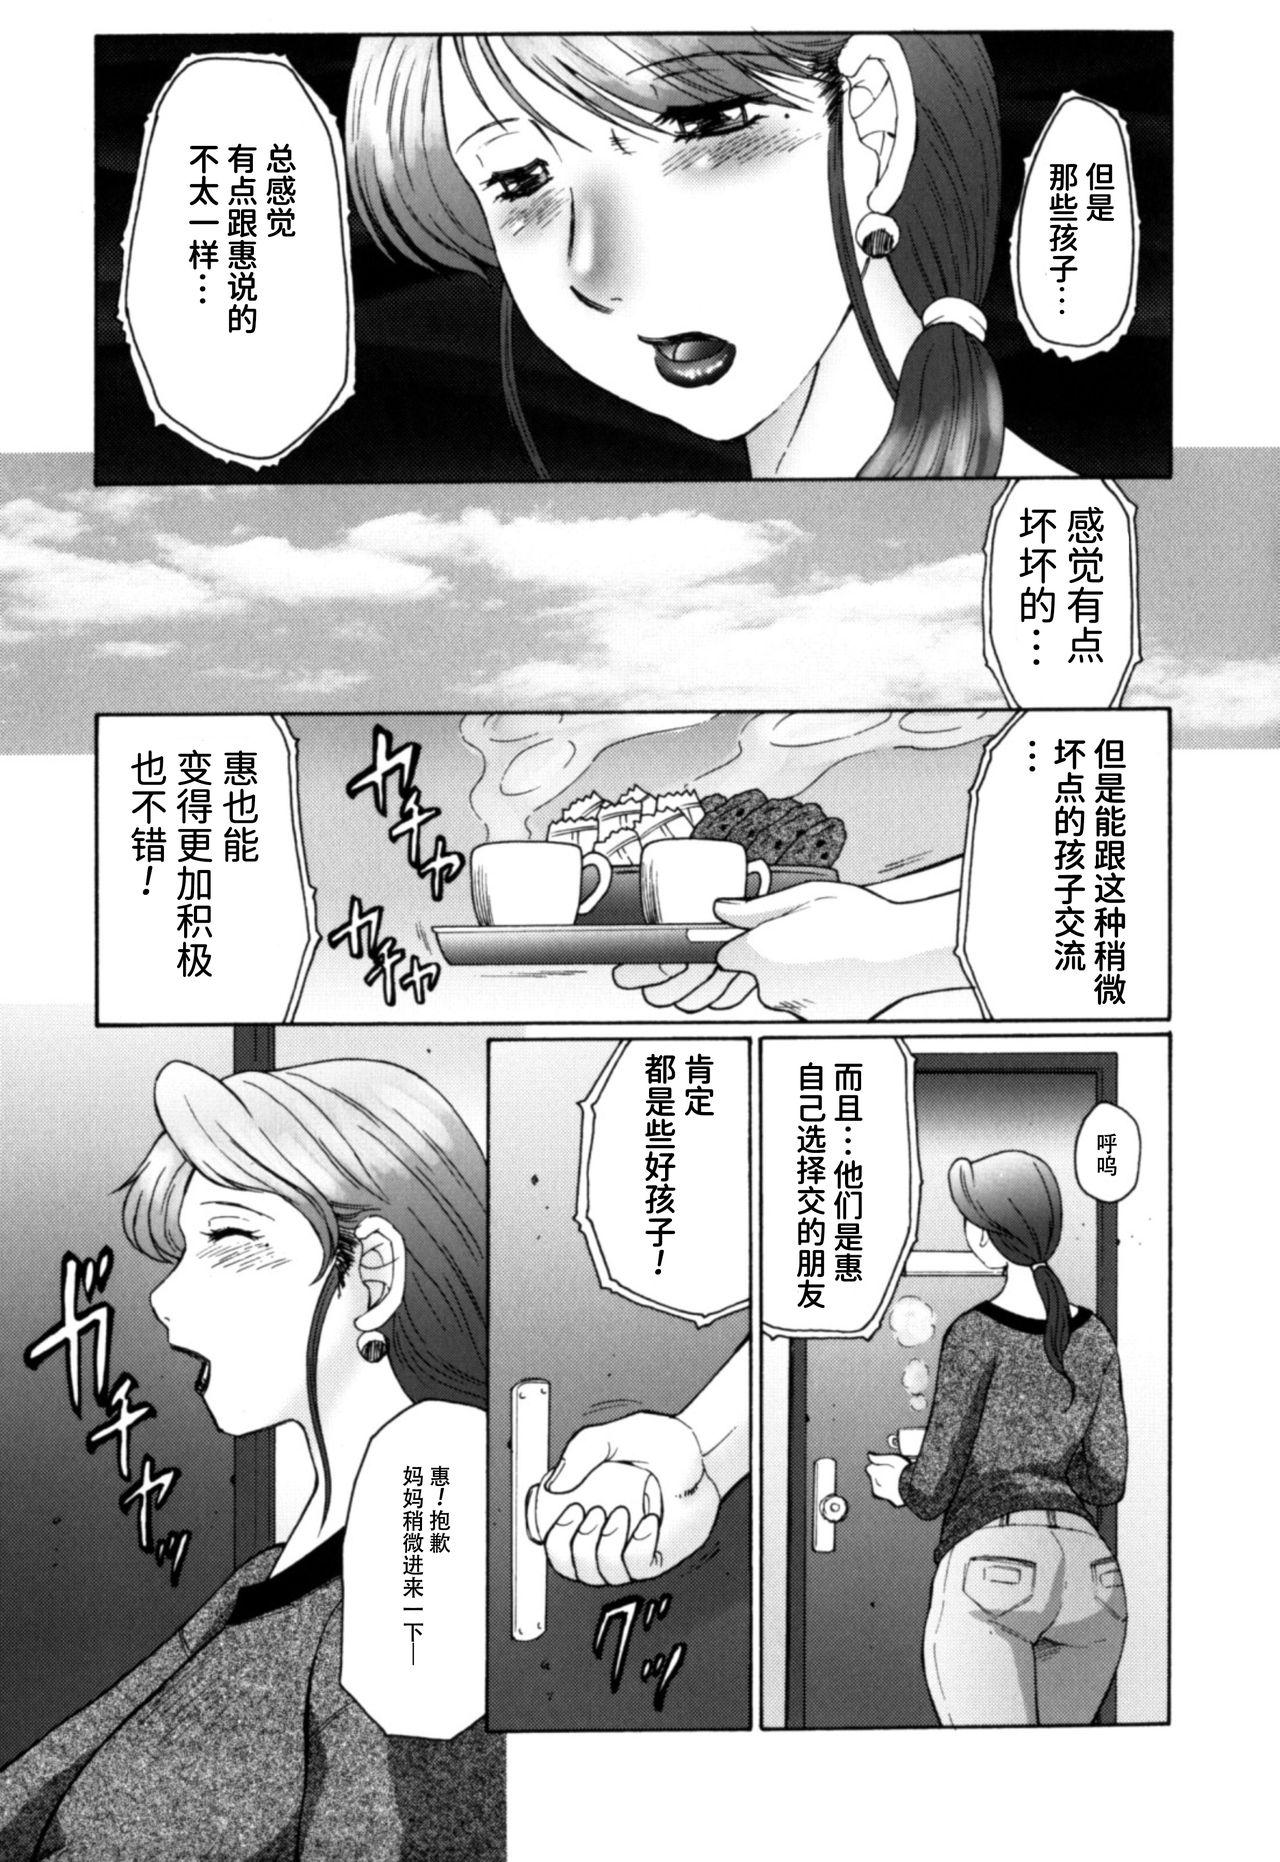 Oral Sex [Fuusen Club] Haha Mamire Ch. 1 [Chinese]【不可视汉化】 Reality Porn - Page 6